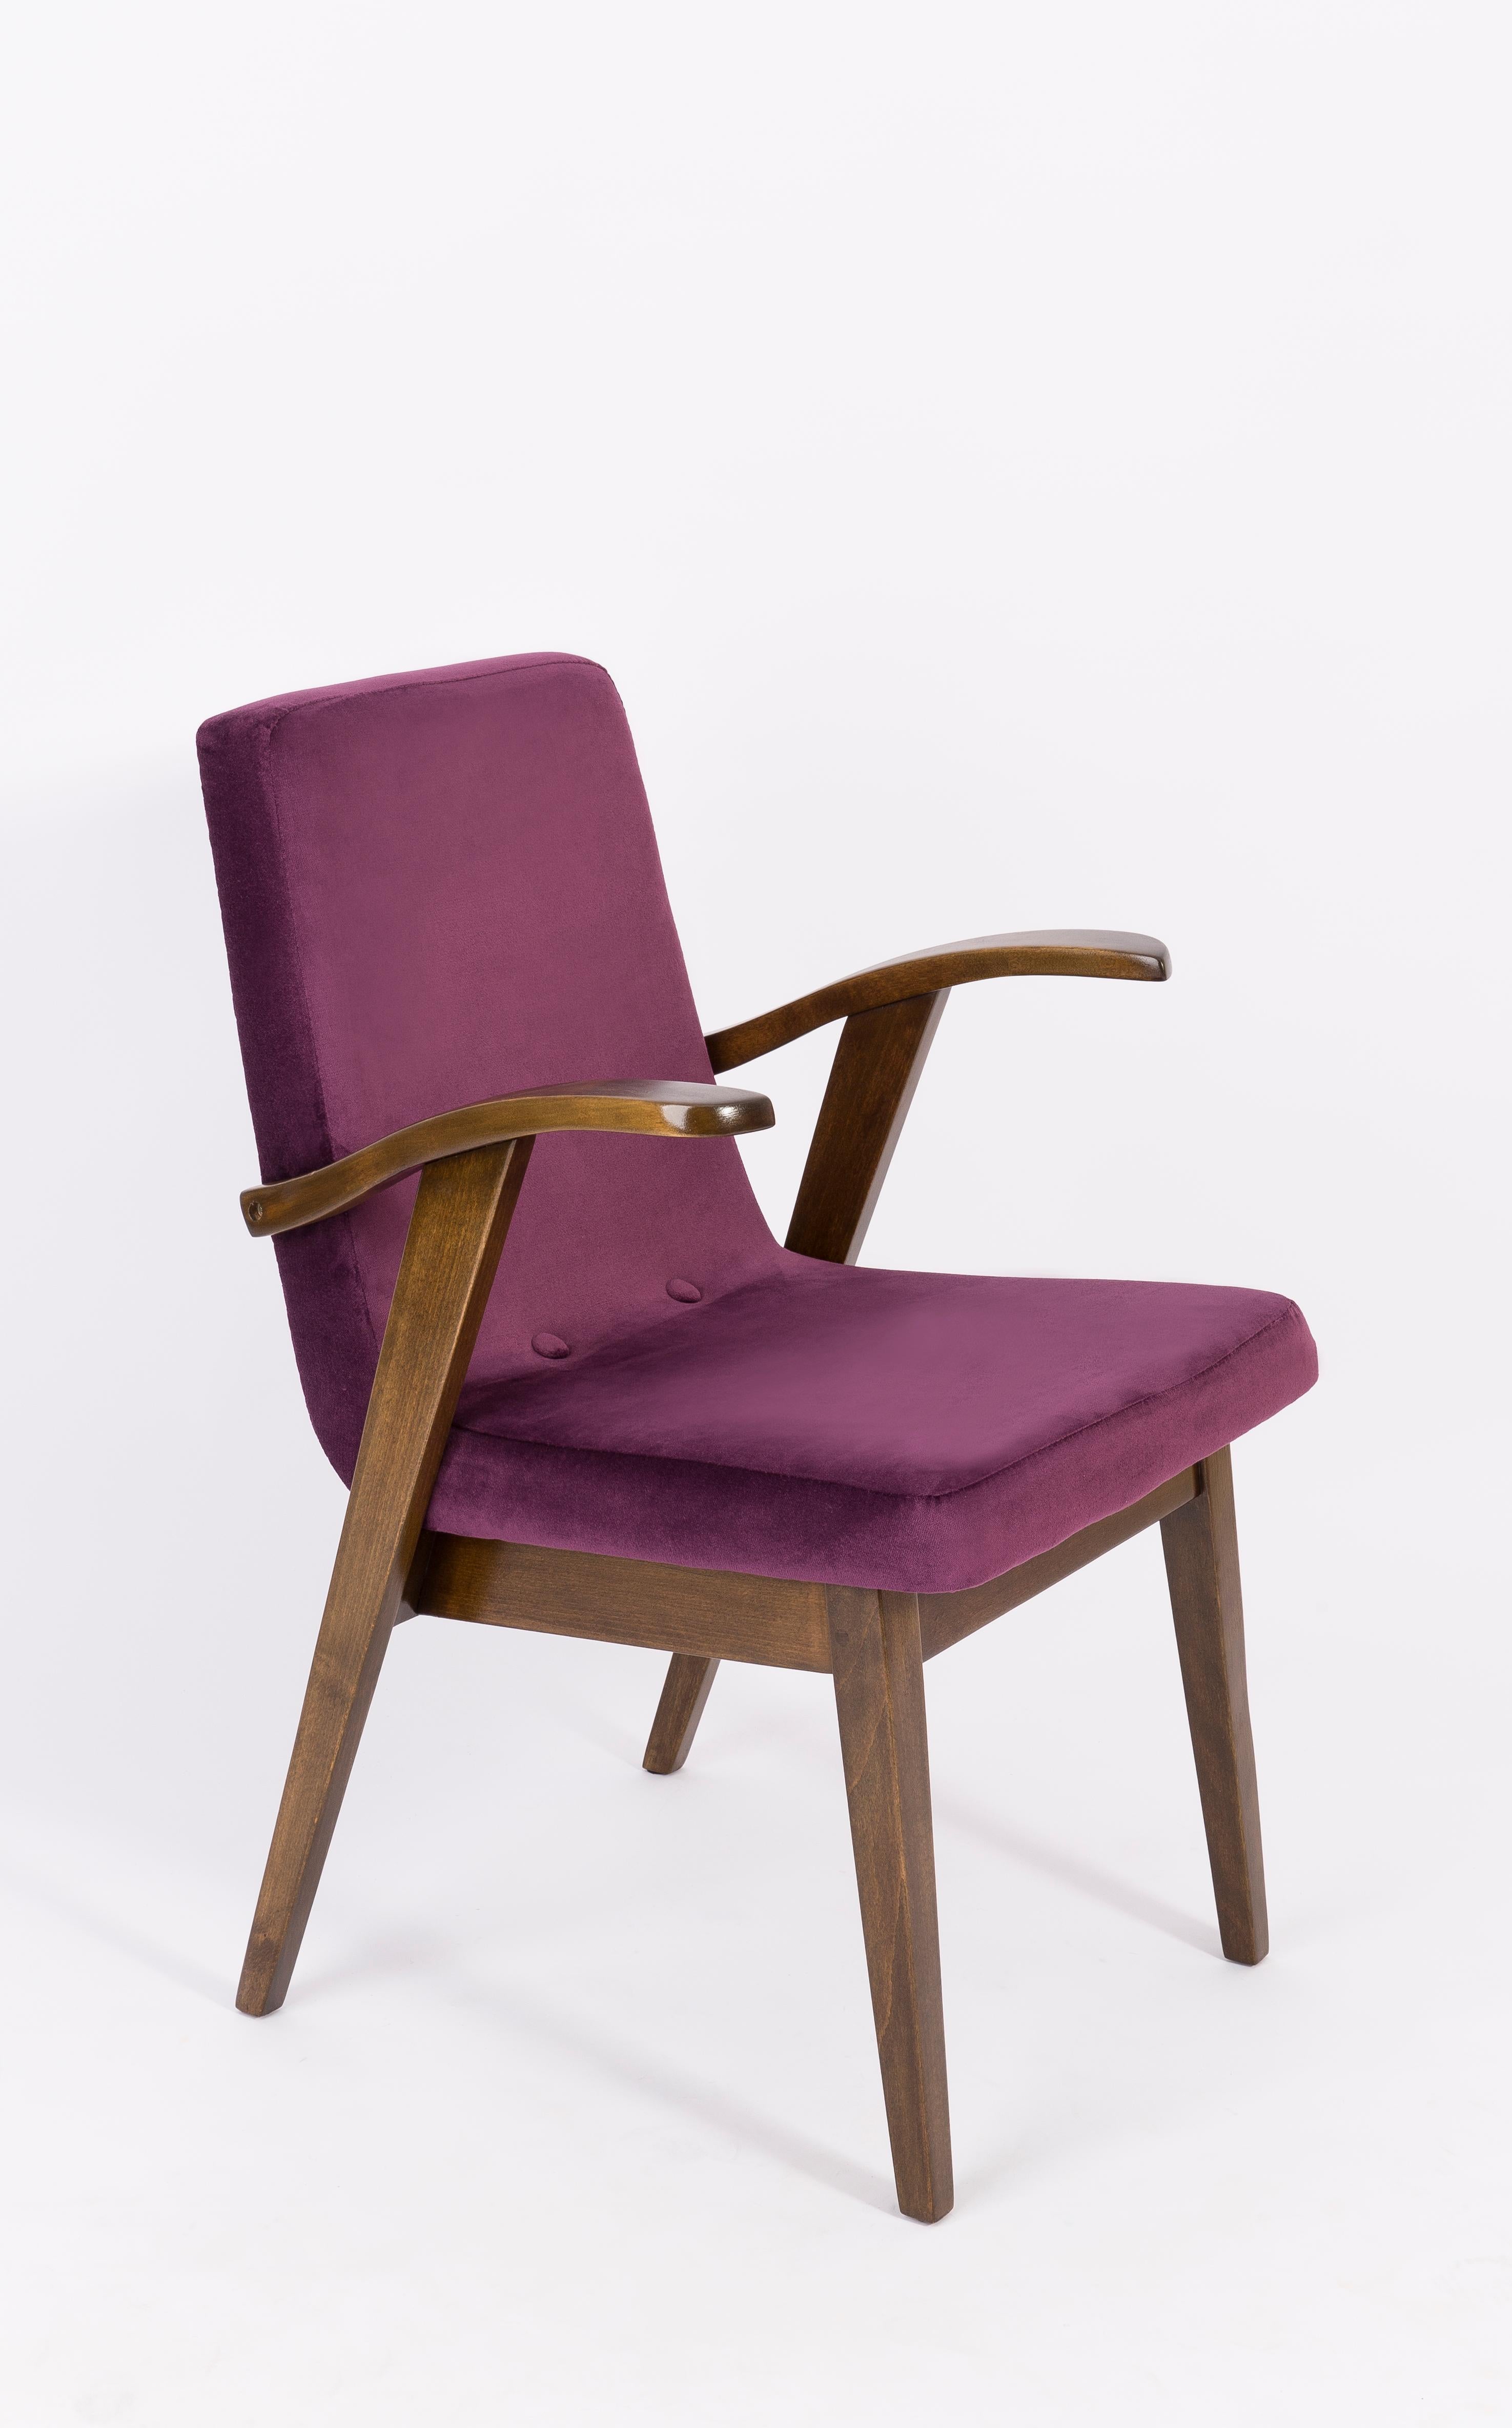 Armchair designed by Mieczyslaw Puchala in a classic edition. Dark wood combined with a plum violet fabric gives it elegance and nobility. The chair has undergone a full carpentry and upholstery renovation. The wood is in excellent condition -